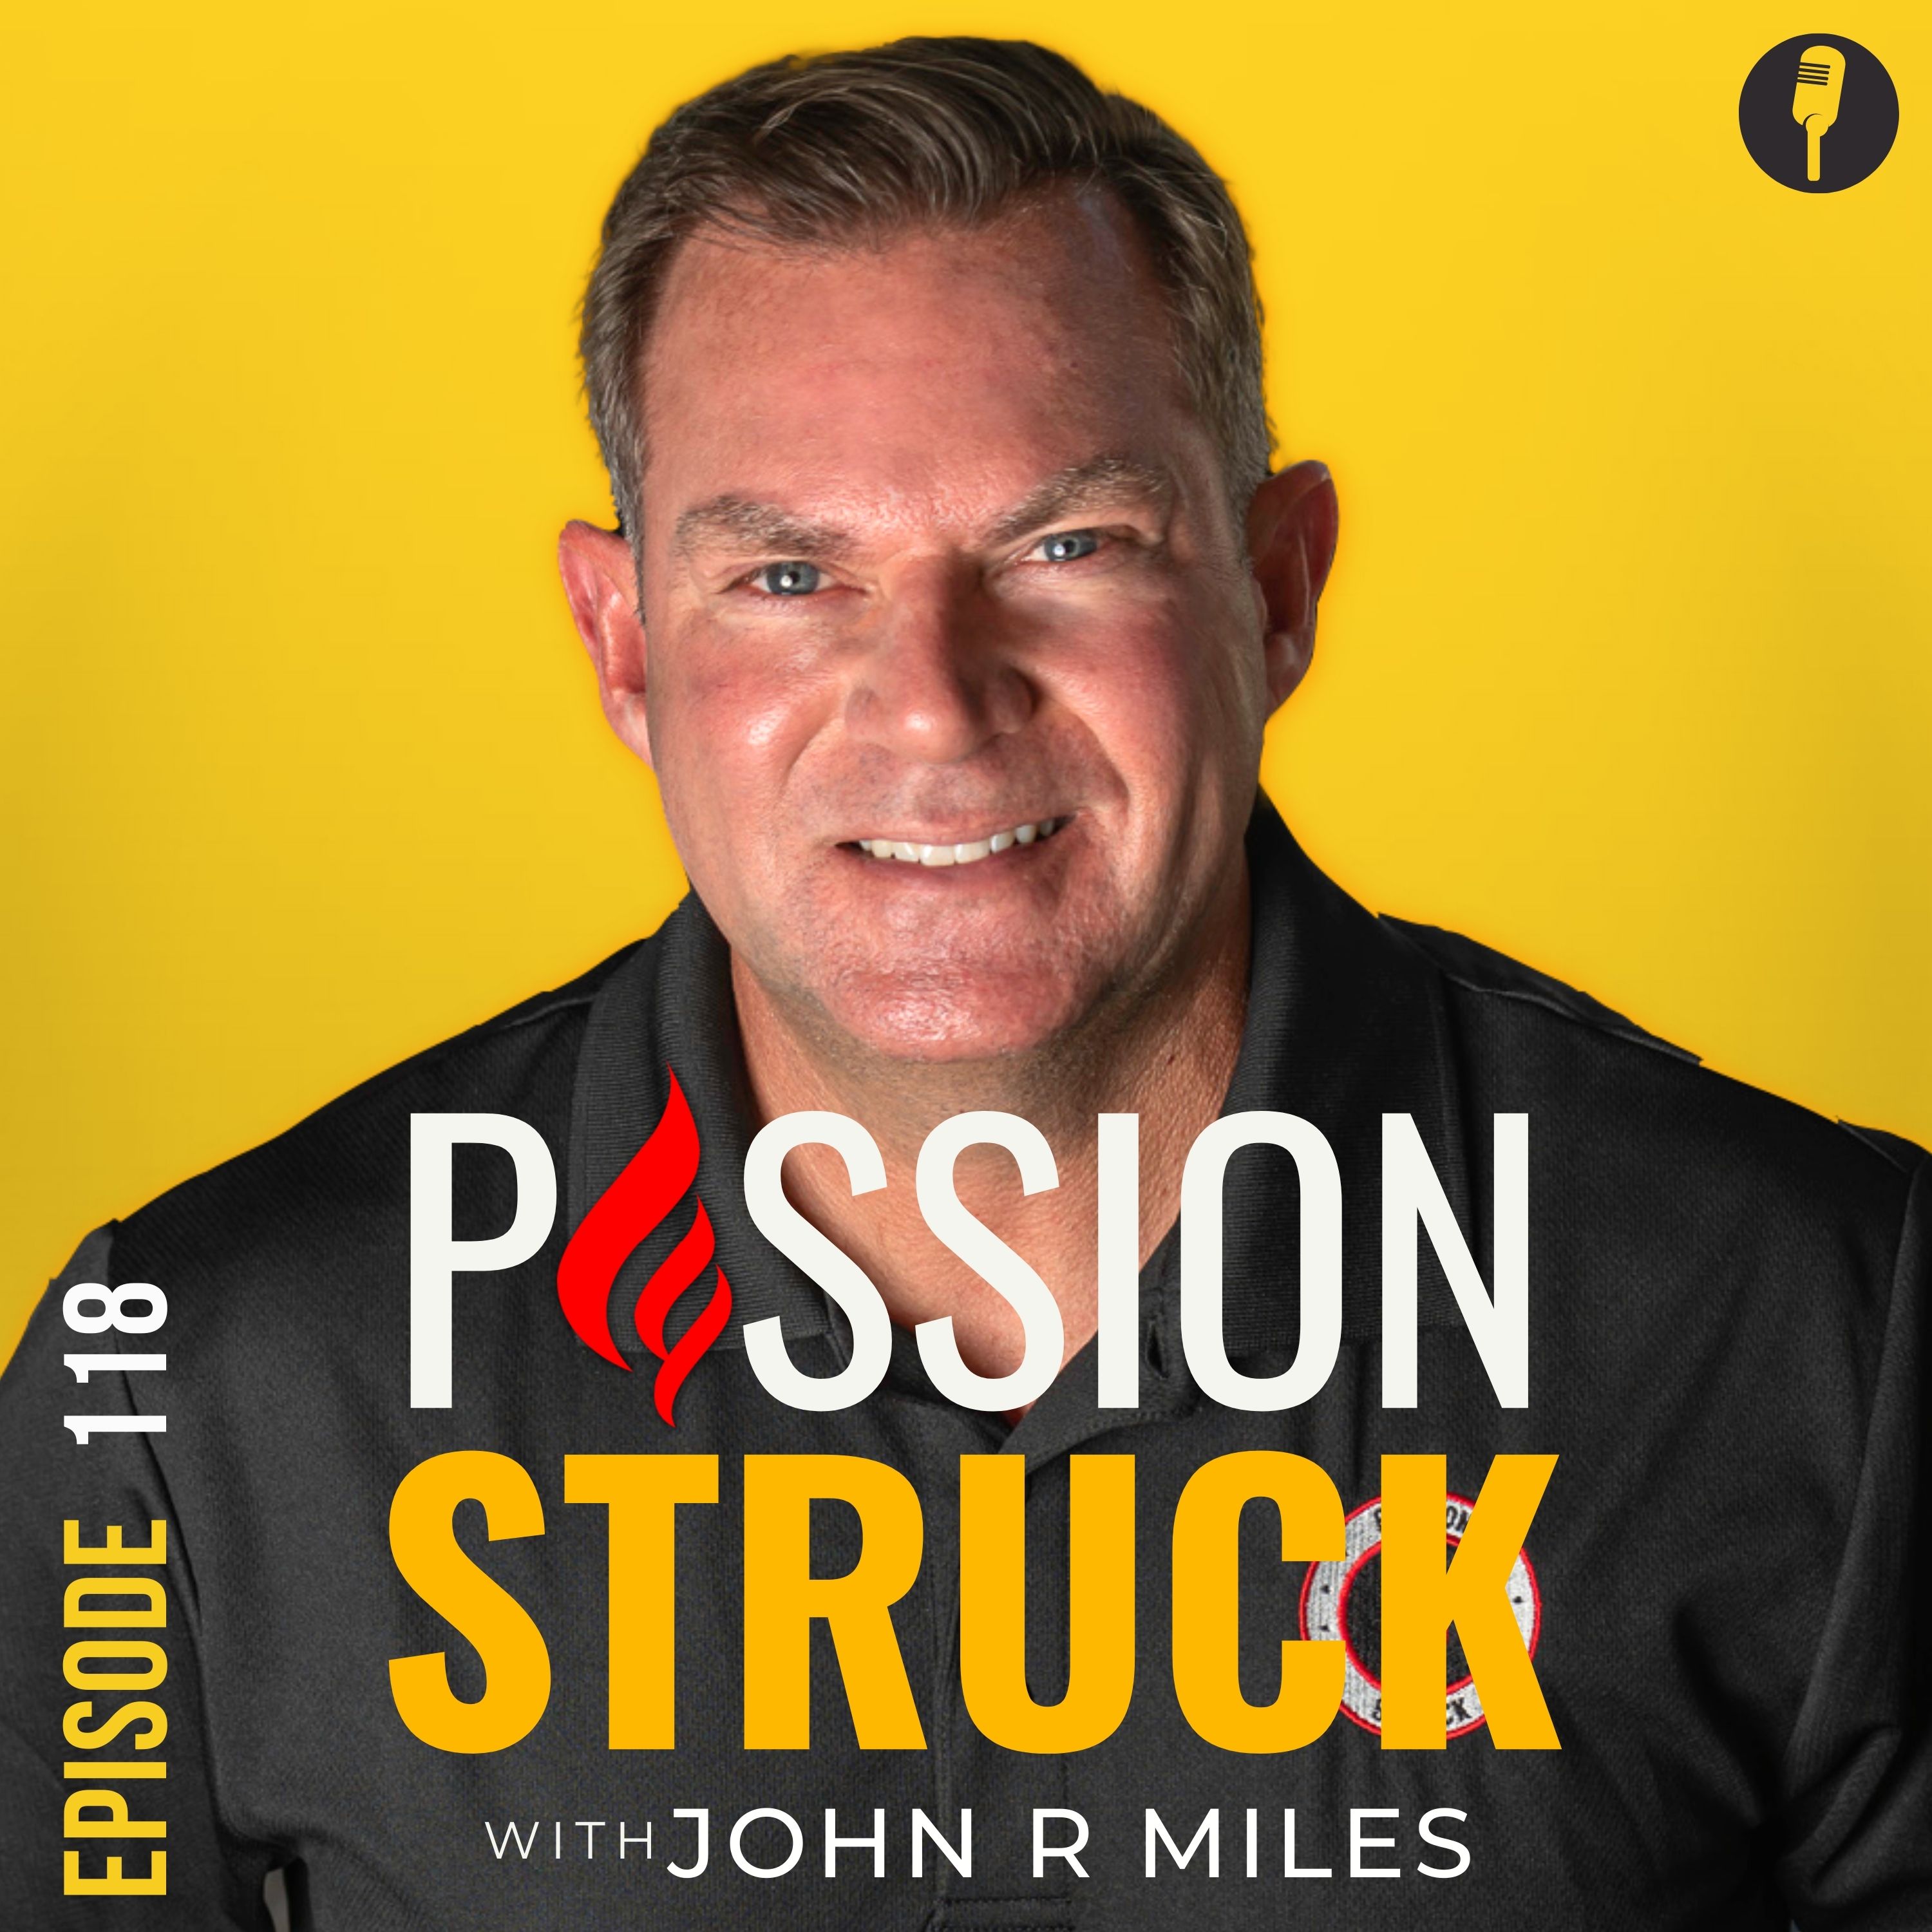 Passion Struck with John R. Miles episode 118 on the power of empathy